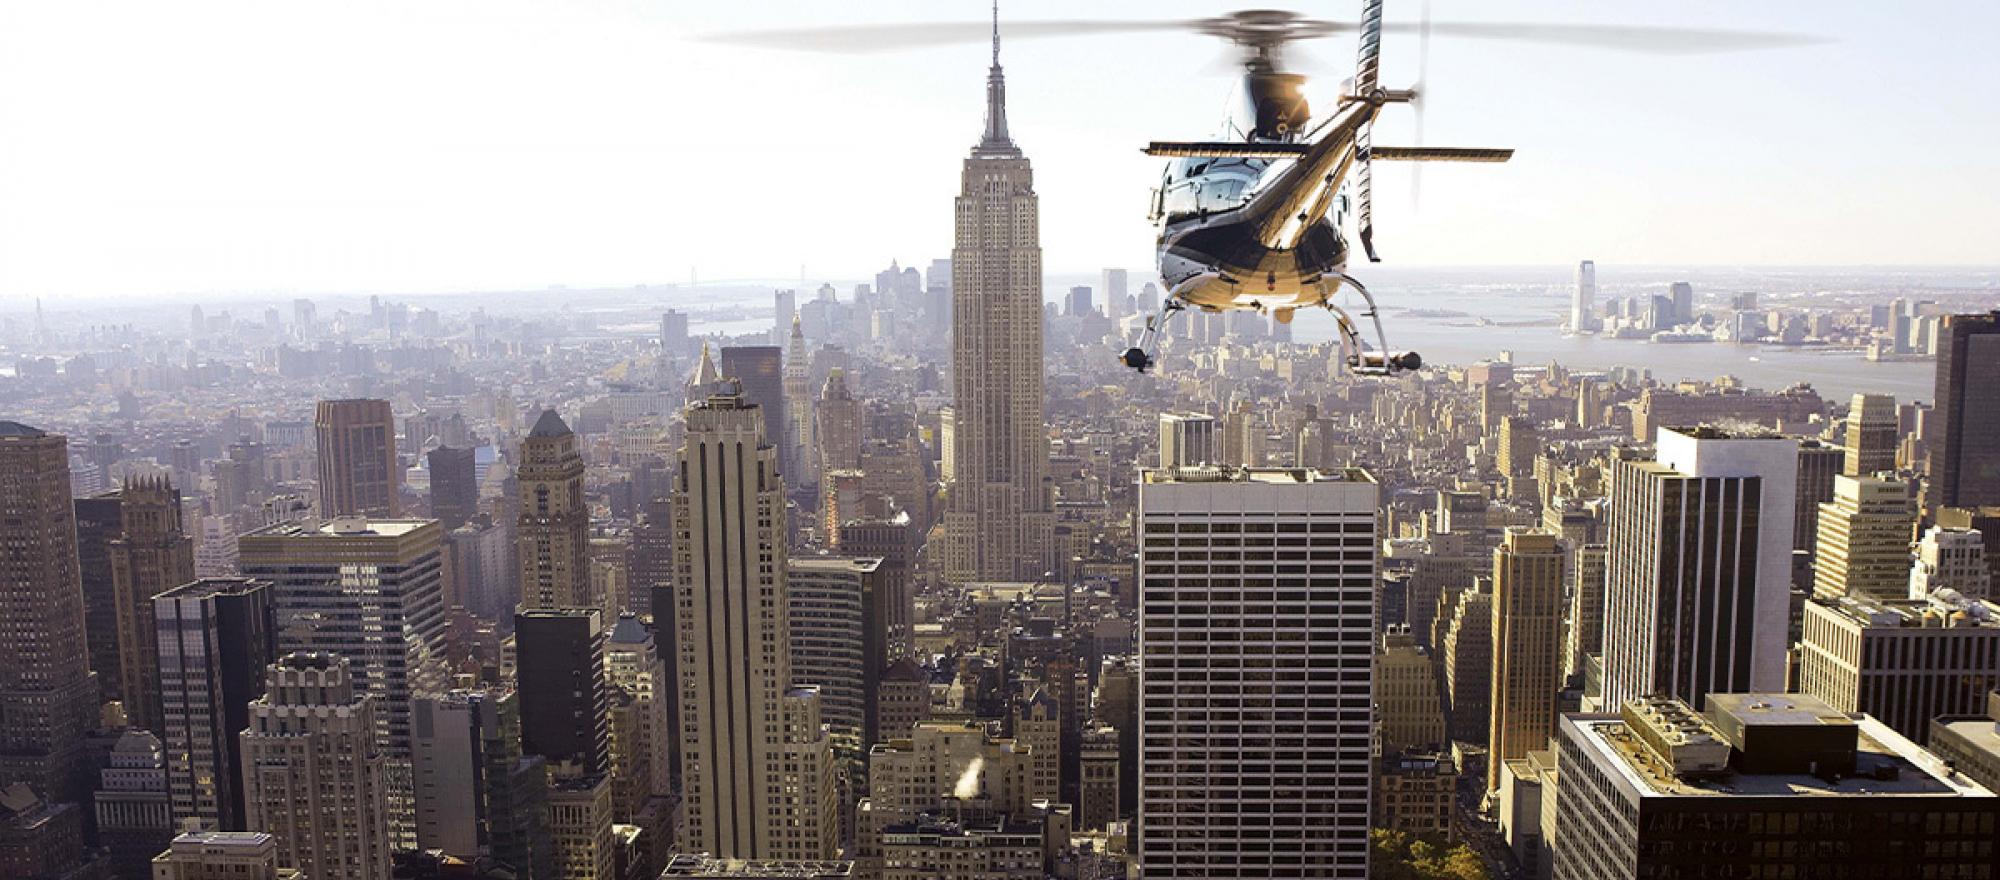 Wings Air Airbus AS350 helicopter in flight over New York City